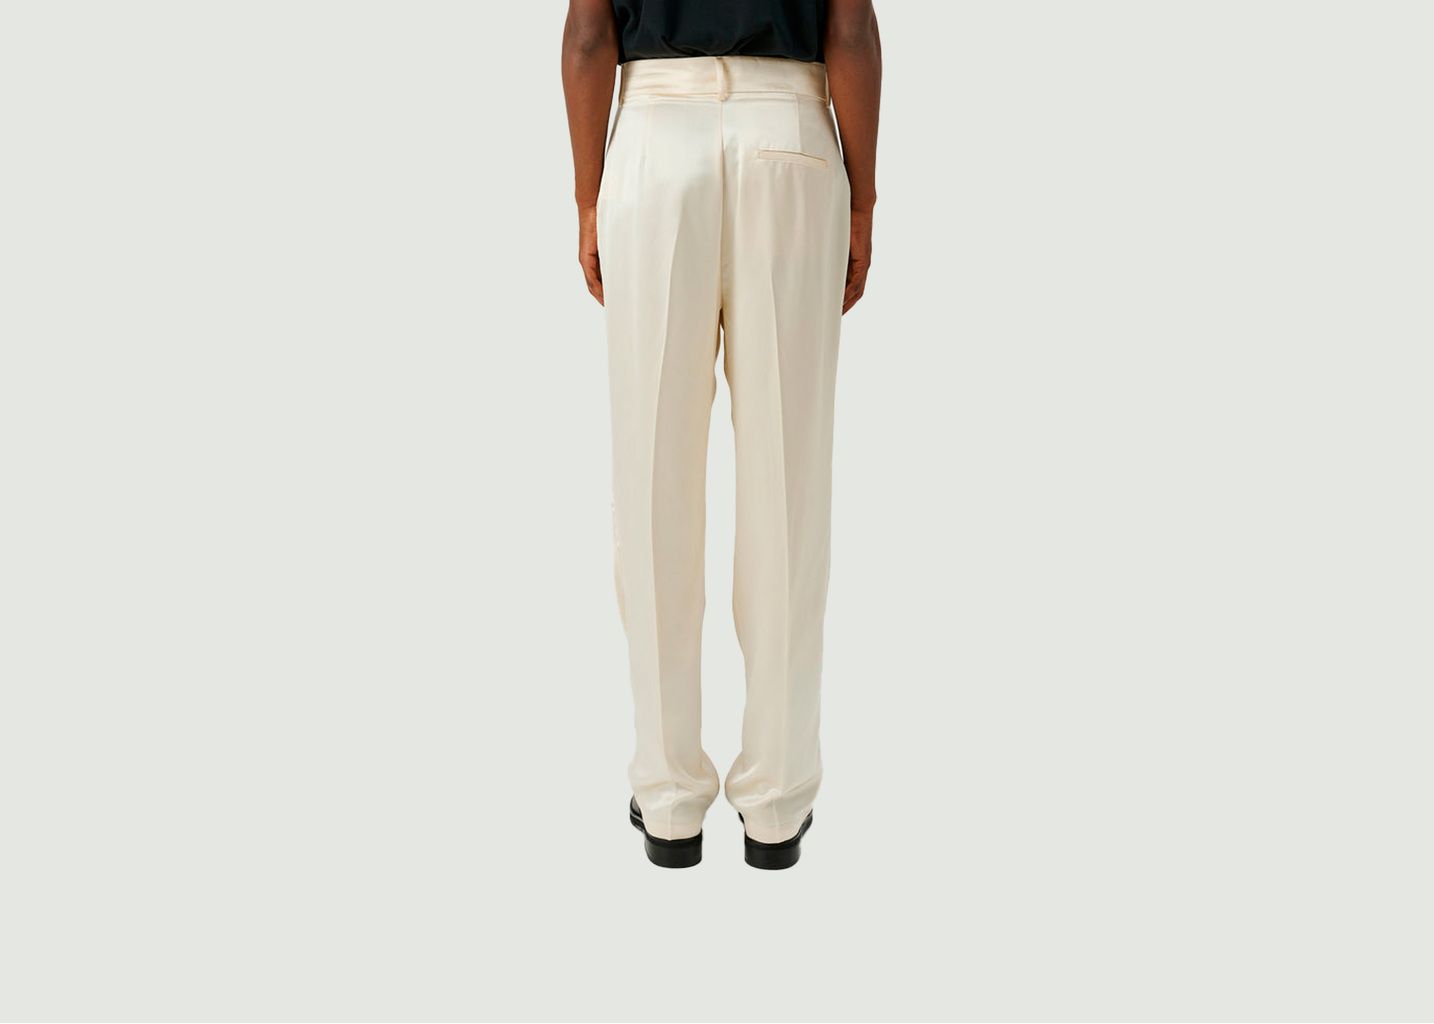 Ula embroided Pant - soulland